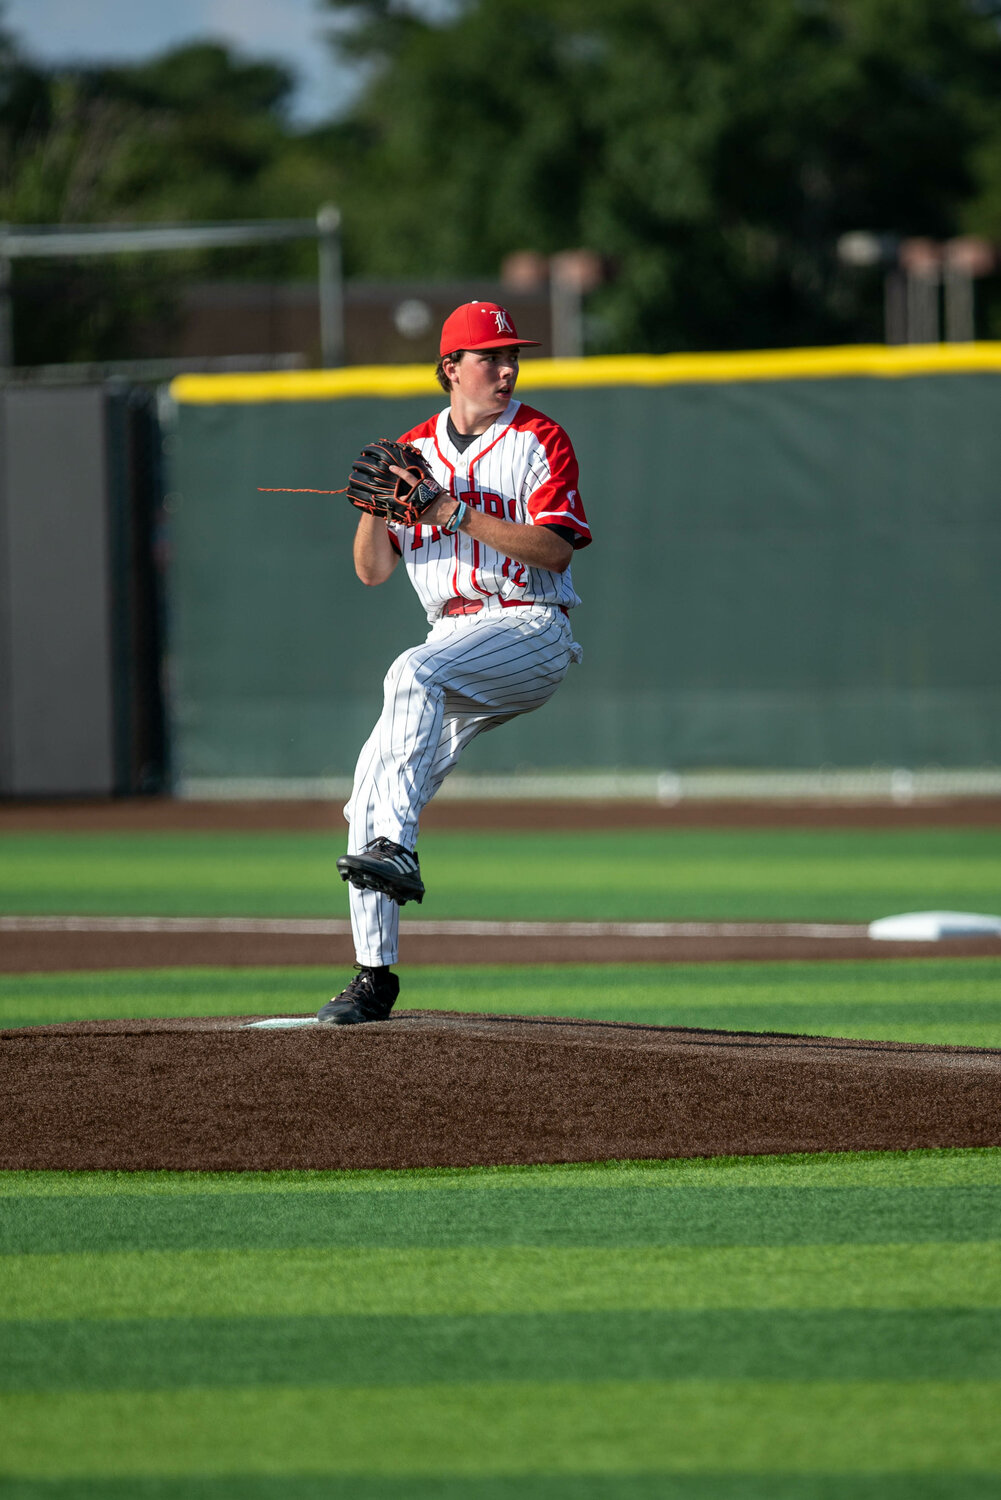 Lucas Moore pitches during Thursday's Regional Semifinal between Katy and Clear Springs at Langham Creek.